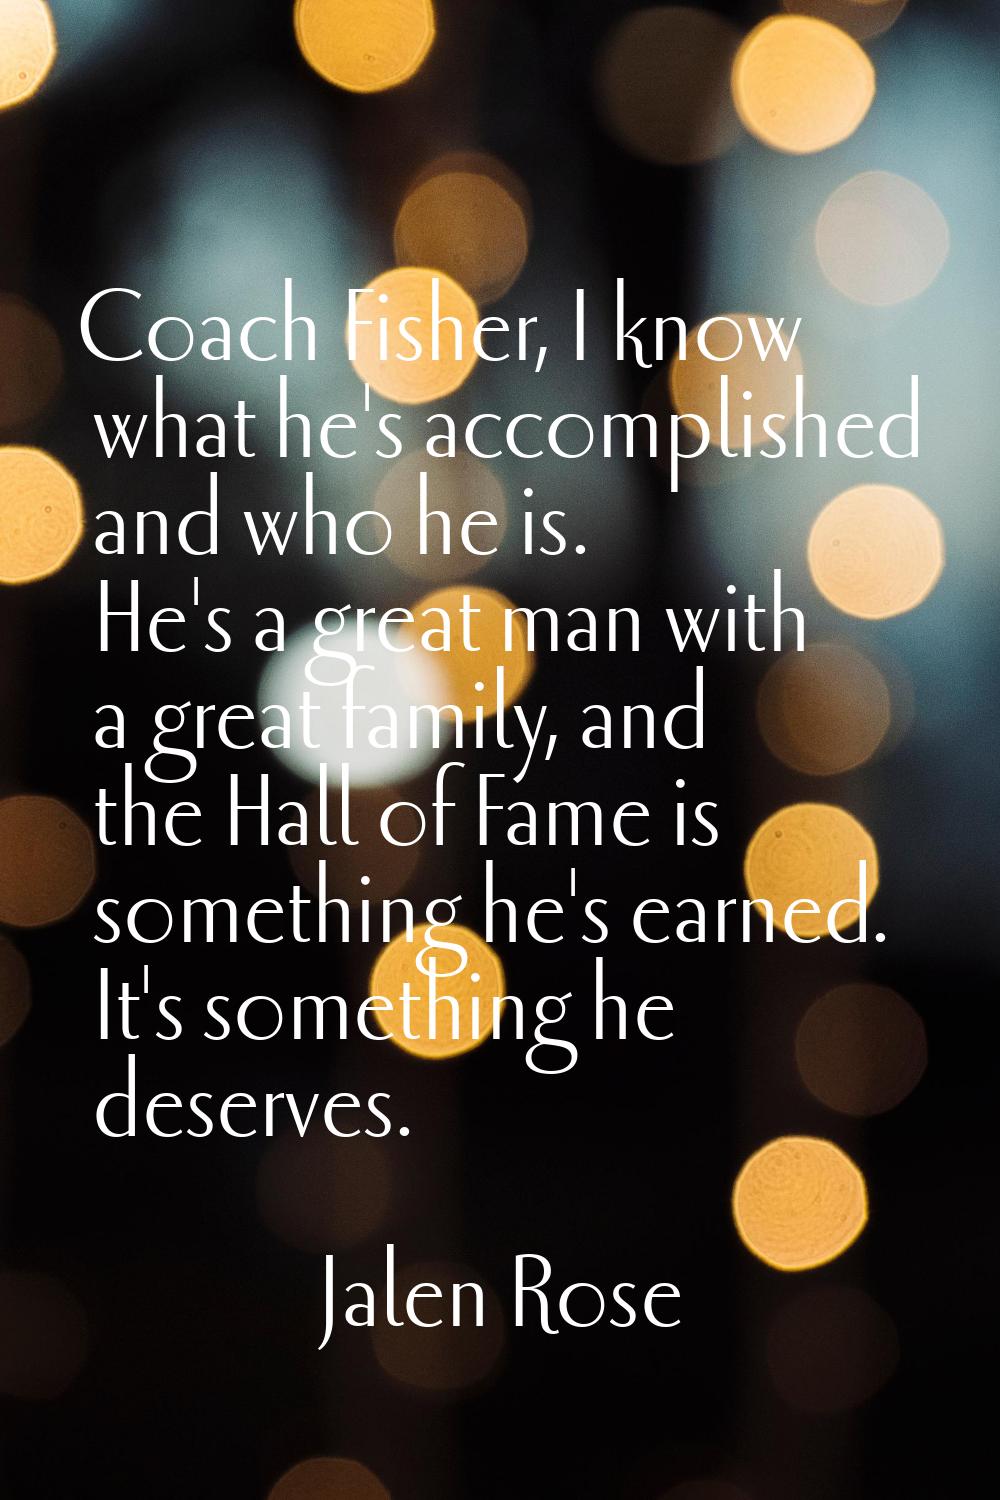 Coach Fisher, I know what he's accomplished and who he is. He's a great man with a great family, an